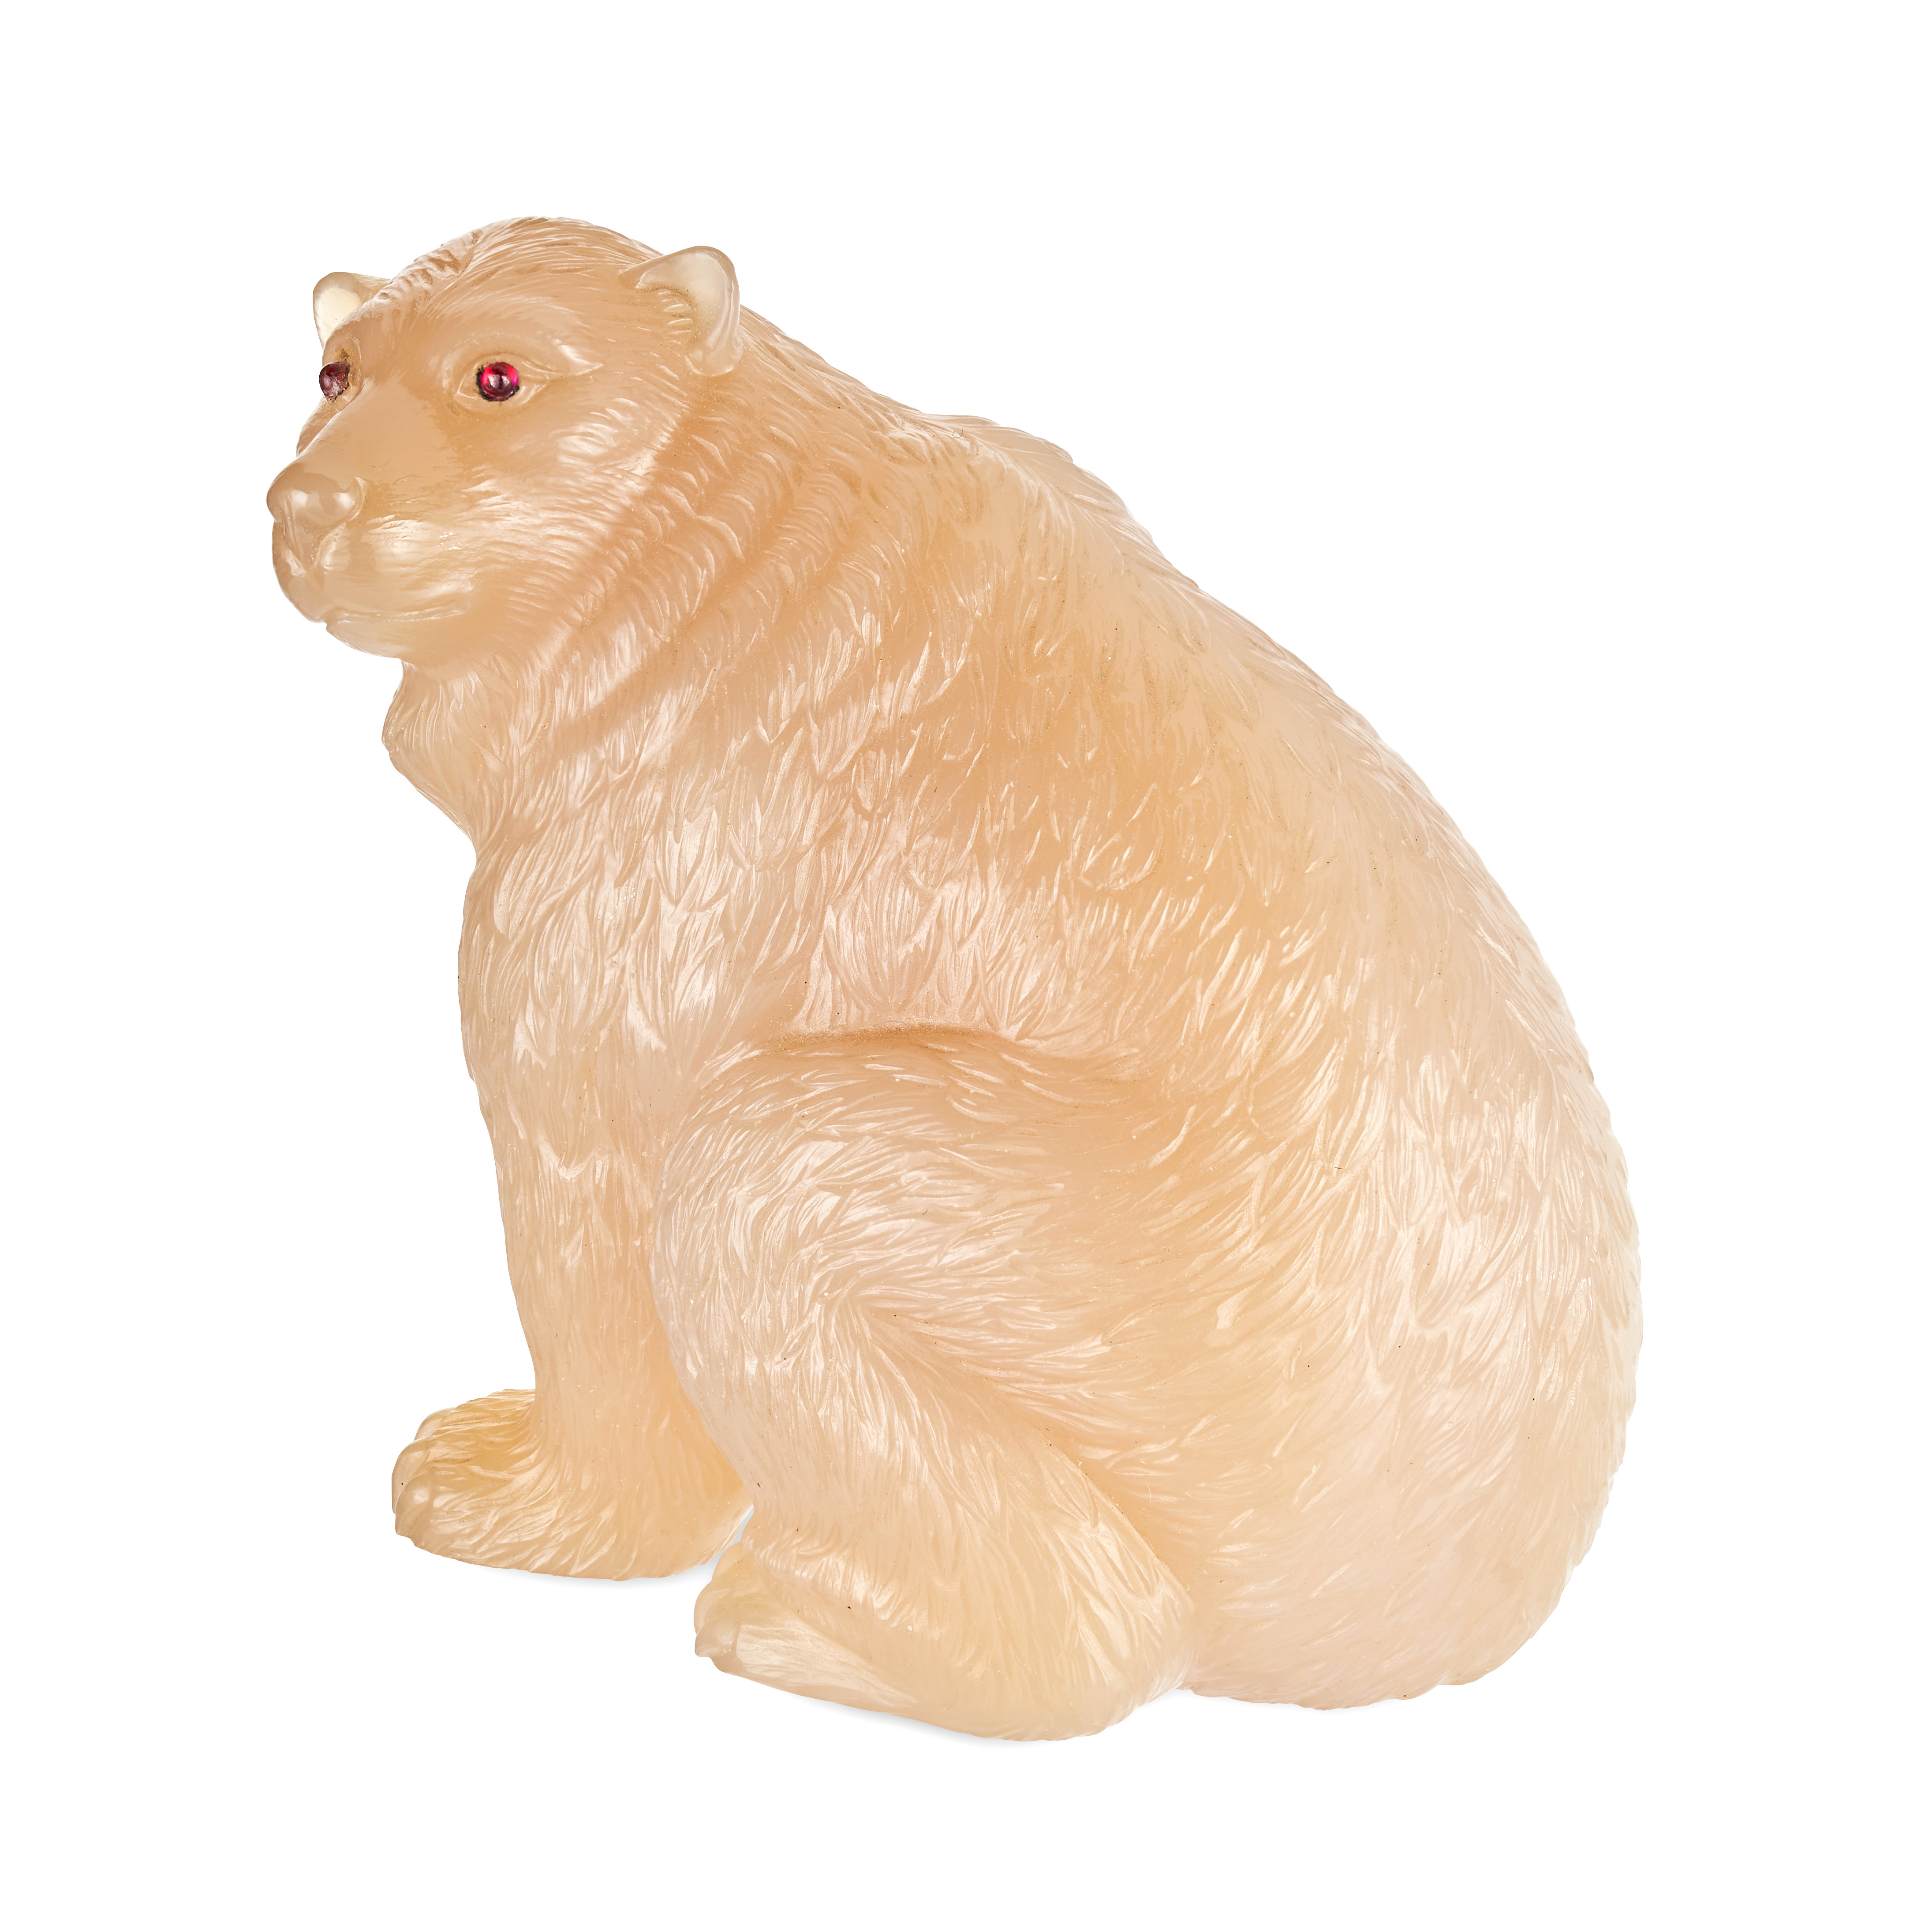 FABERGE, A RARE JEWELLED AGATE MODEL OF A POLAR BEAR, ST PETERSBURG, CIRCA 1900 - Image 4 of 10